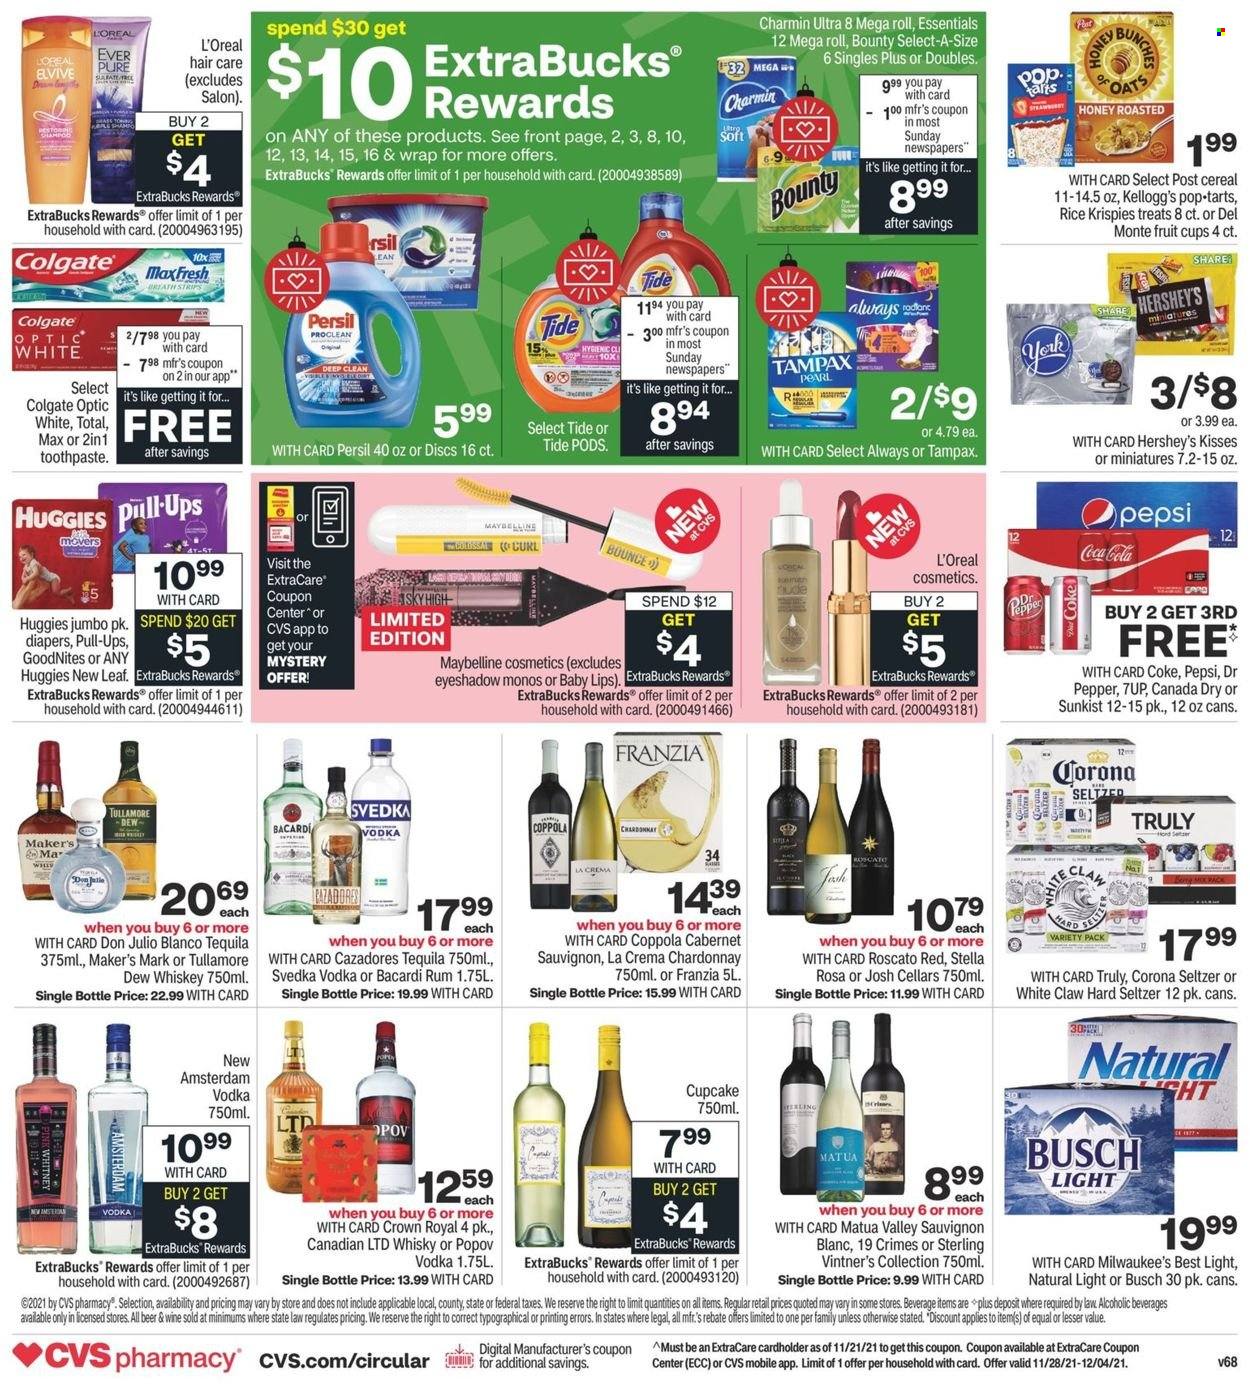 thumbnail - CVS Pharmacy Flyer - 11/28/2021 - 12/04/2021 - Sales products - Hershey's, Bounty, Kellogg's, Pop-Tarts, cereals, oats, Rice Krispies, Canada Dry, Coca-Cola, Pepsi, Dr. Pepper, 7UP, Cabernet Sauvignon, red wine, white wine, Chardonnay, wine, Sauvignon Blanc, Bacardi, rum, tequila, vodka, whiskey, White Claw, Hard Seltzer, TRULY, whisky, Huggies, nappies, Charmin, Tide, Persil, Bounce, Colgate, toothpaste, Tampax, L’Oréal, Maybelline, beer, Busch, Corona Extra, eyeshadow. Page 2.